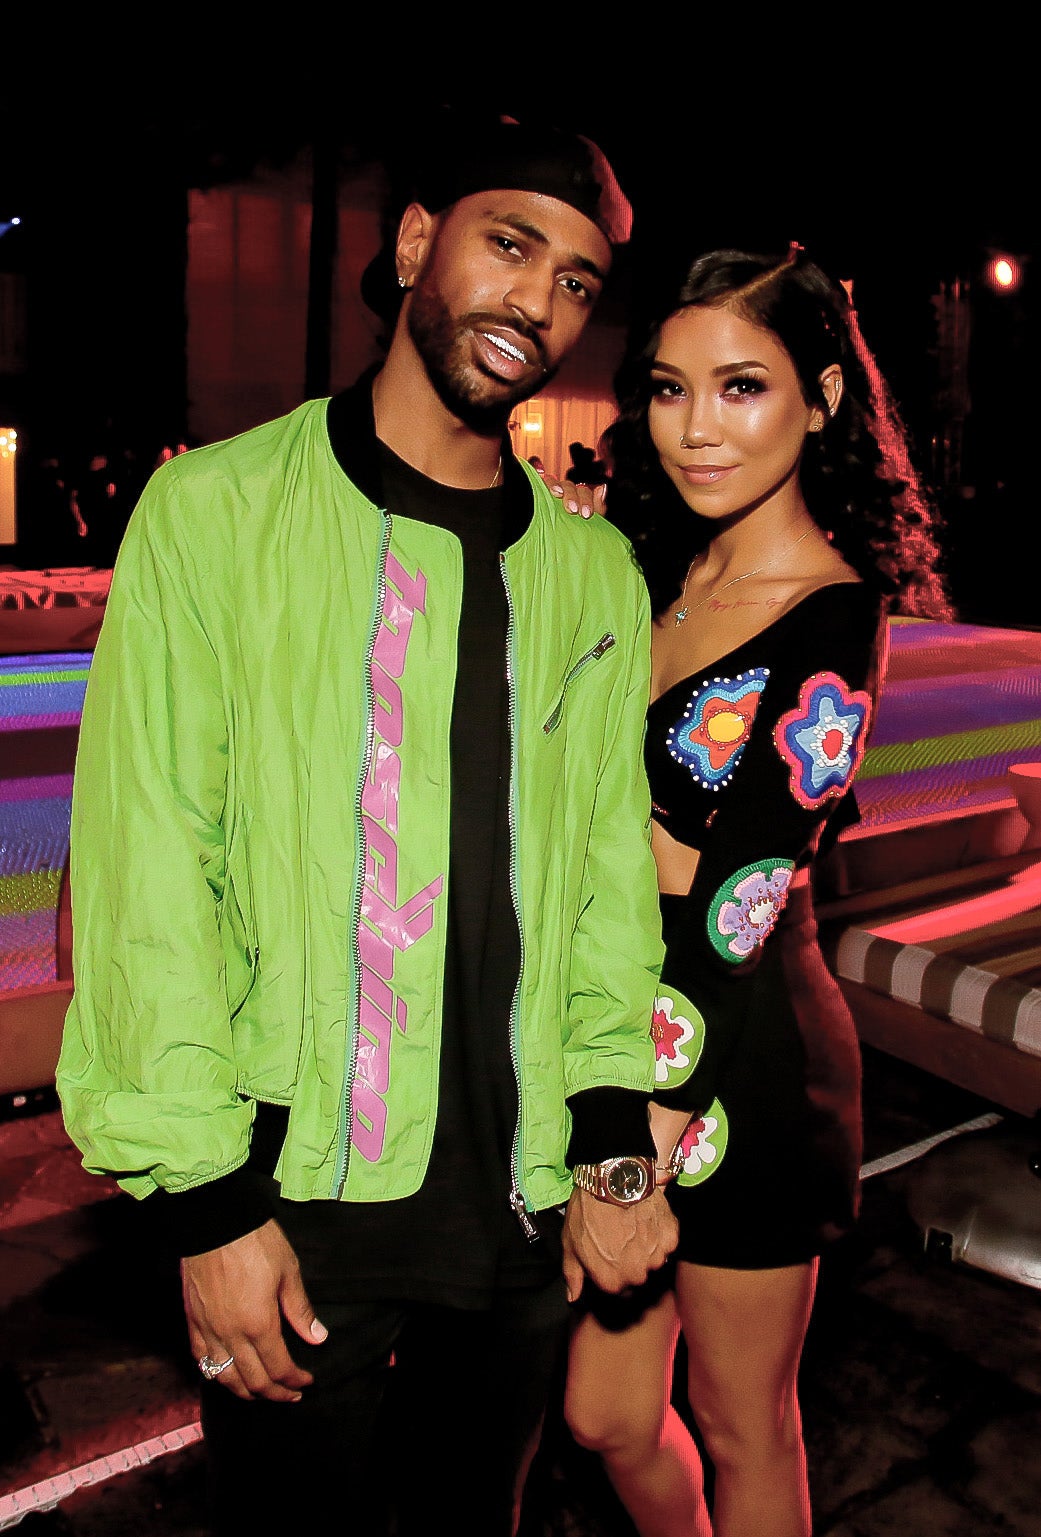  Big Sean, Halle Berry, Keke Palmer and More Celebs Out and About!
